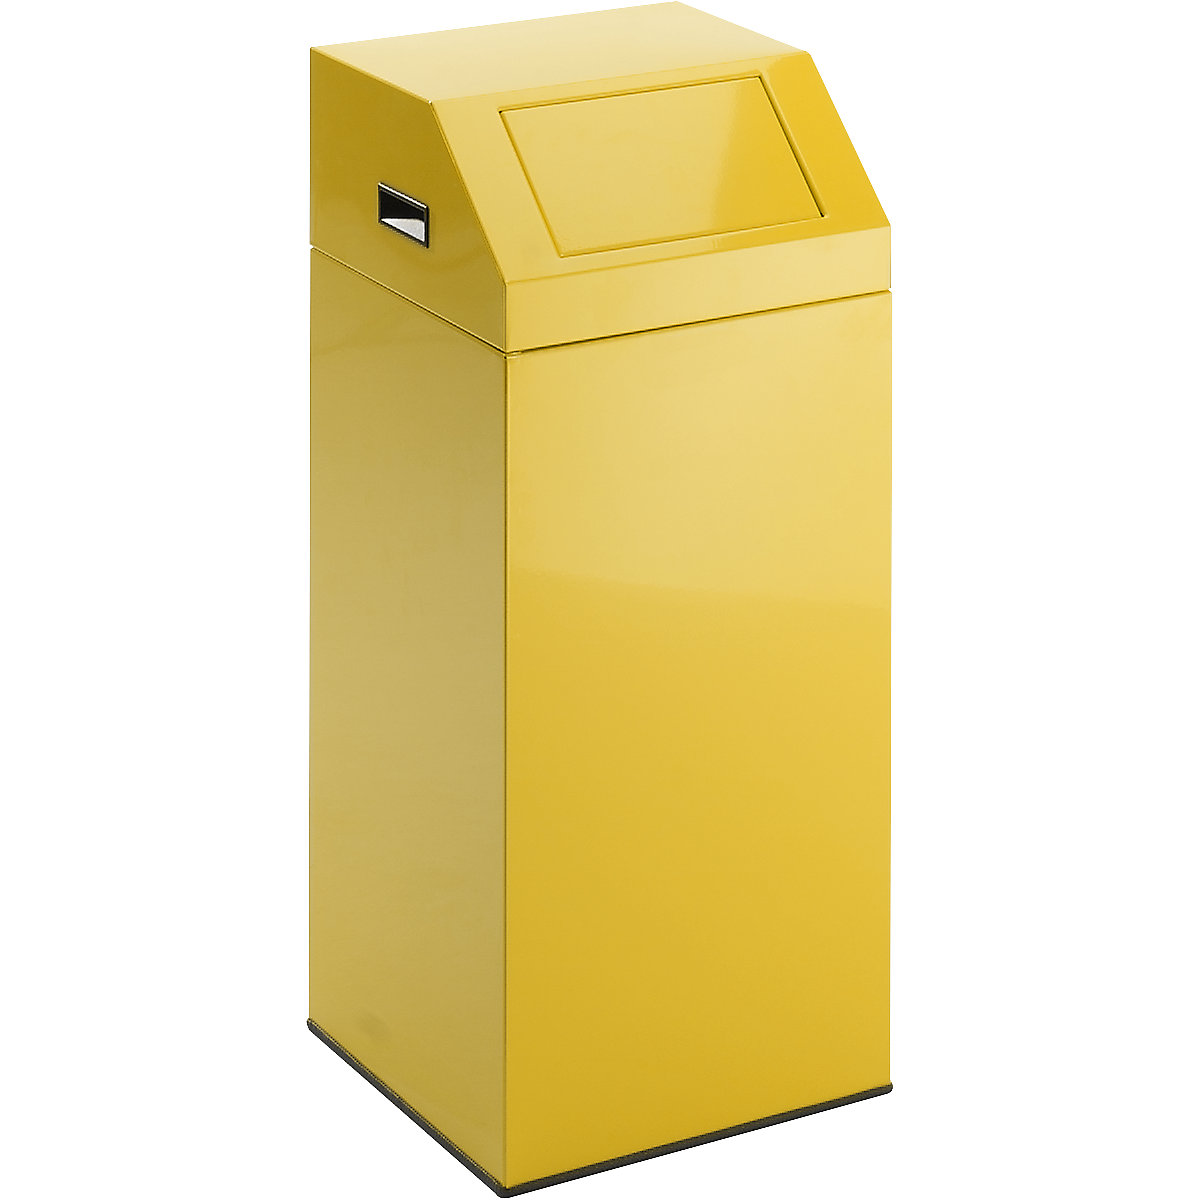 EUROKRAFTpro – Recyclable waste collector, capacity 76 l, WxHxD 380 x 890 x 380 mm, traffic yellow